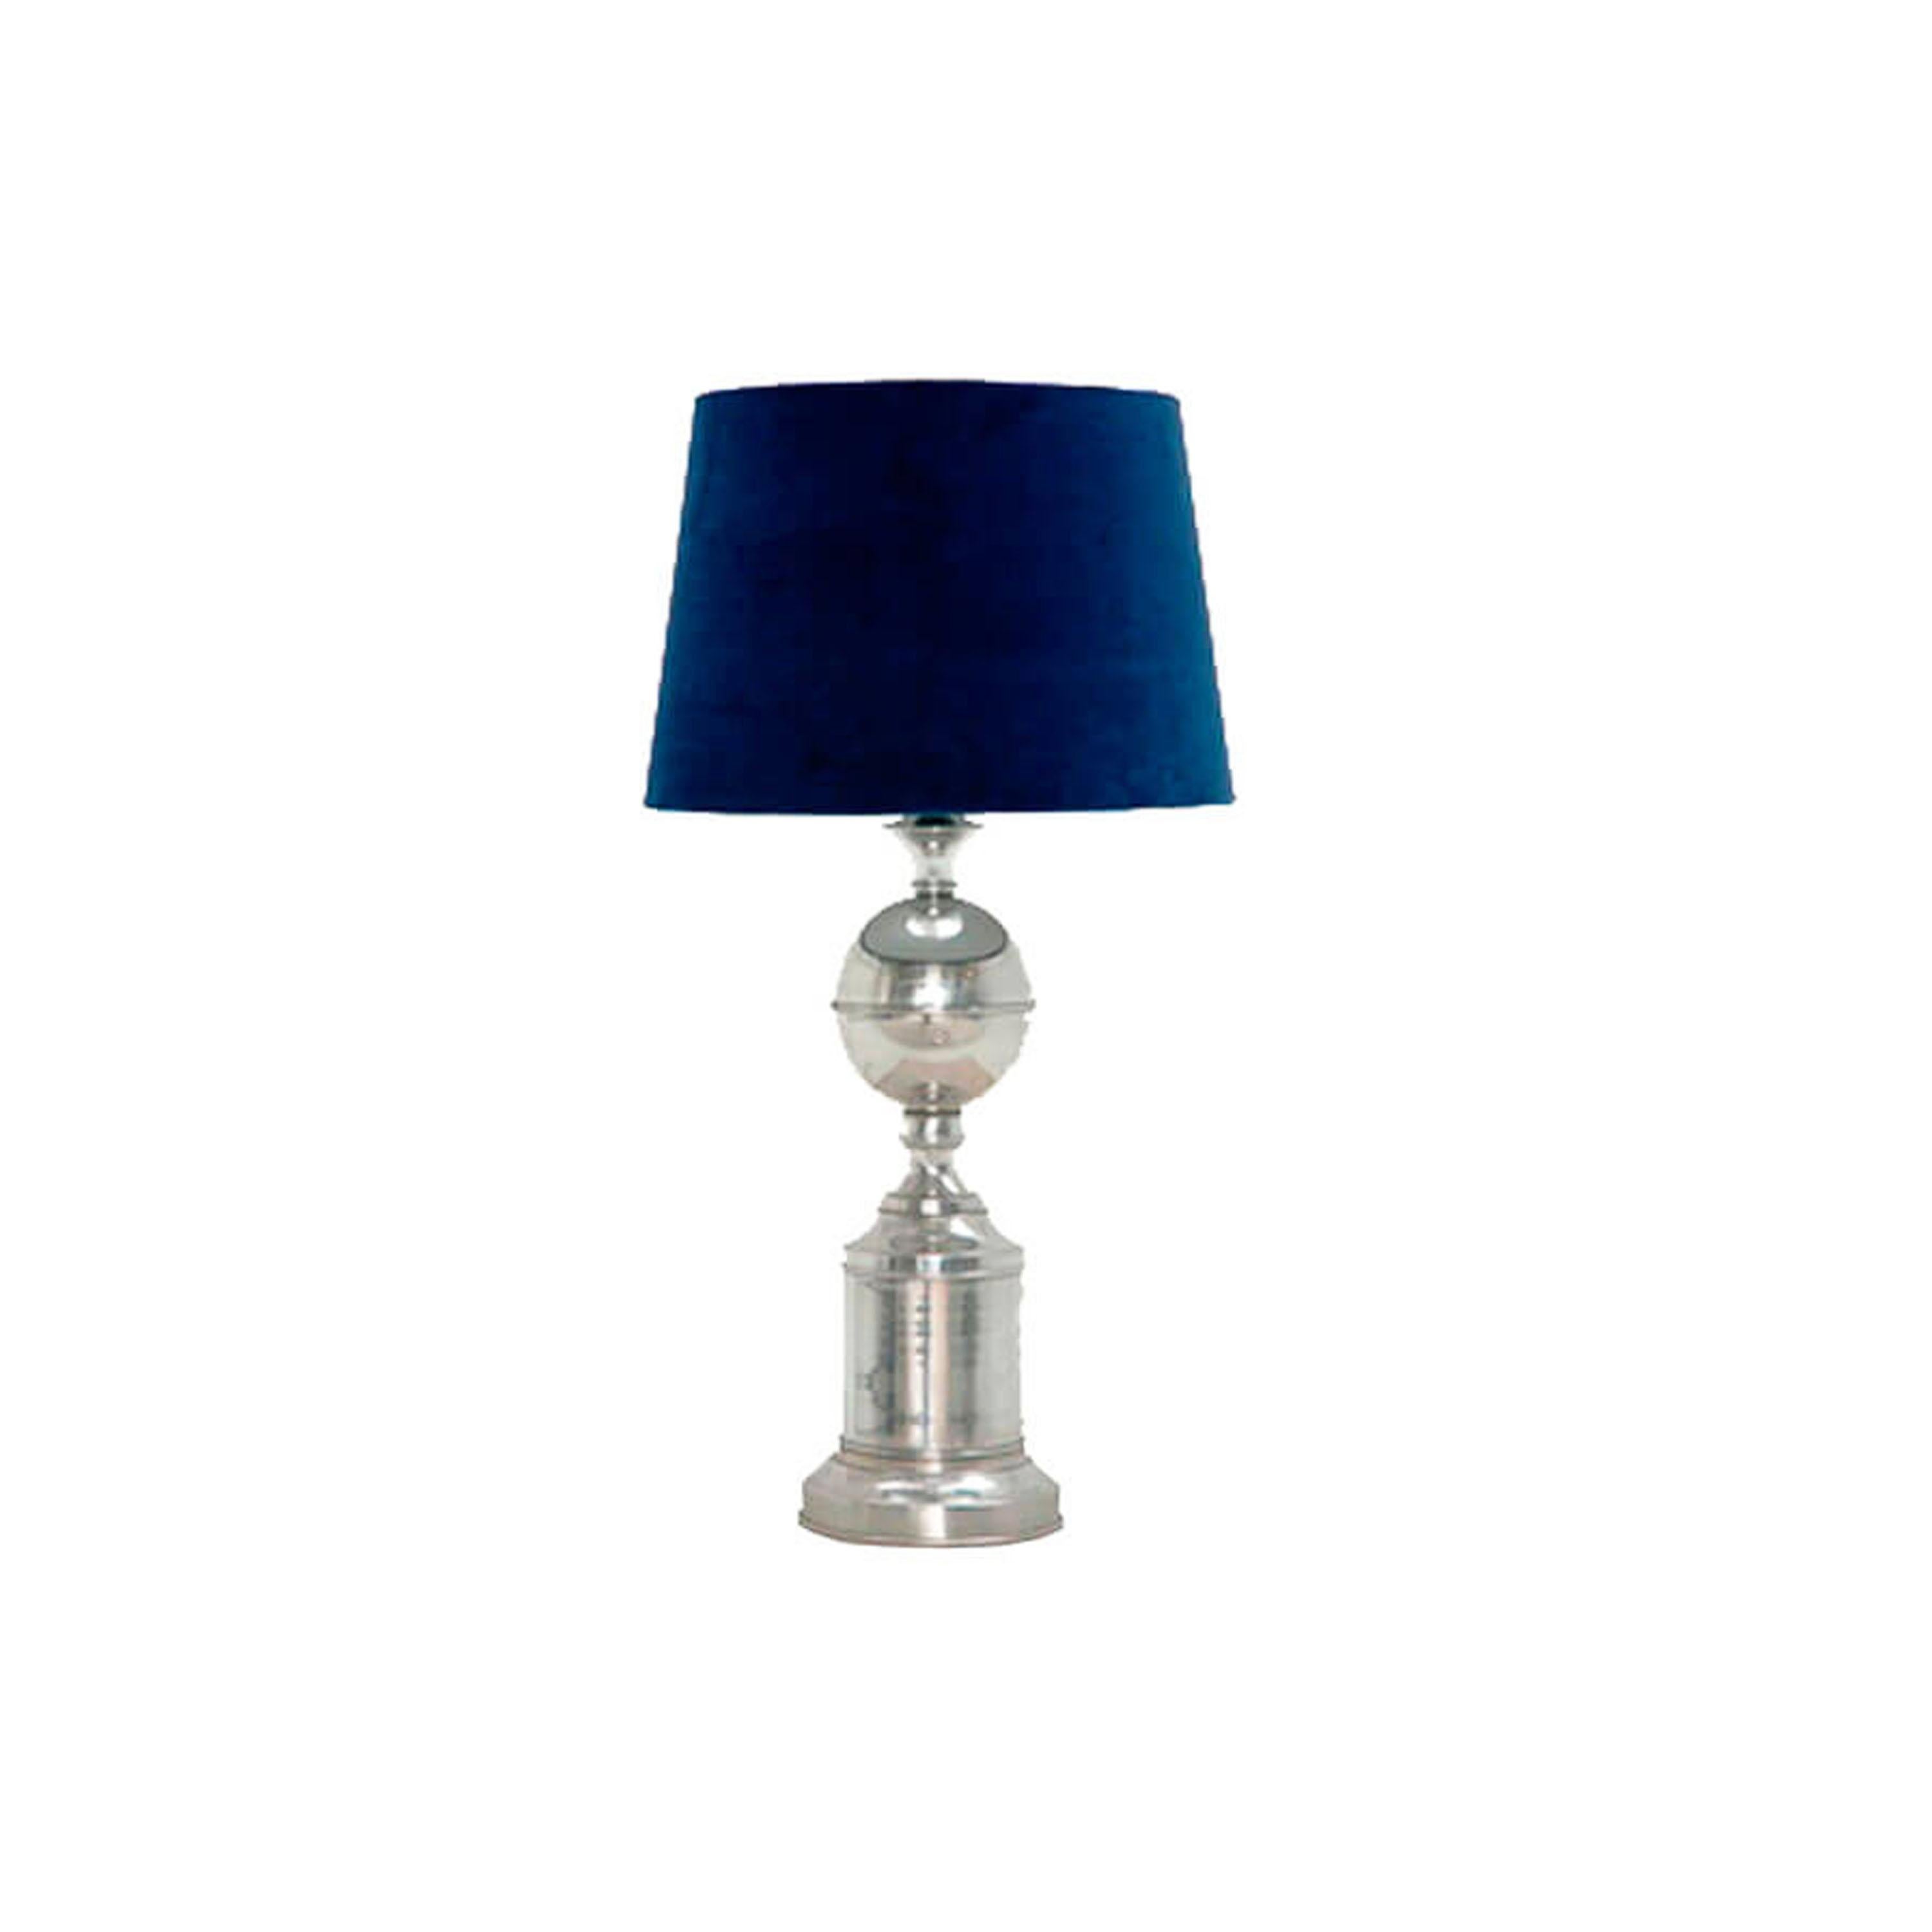 Pair of chrome metal lamps with handmade lampshade in blue cotton velvet.